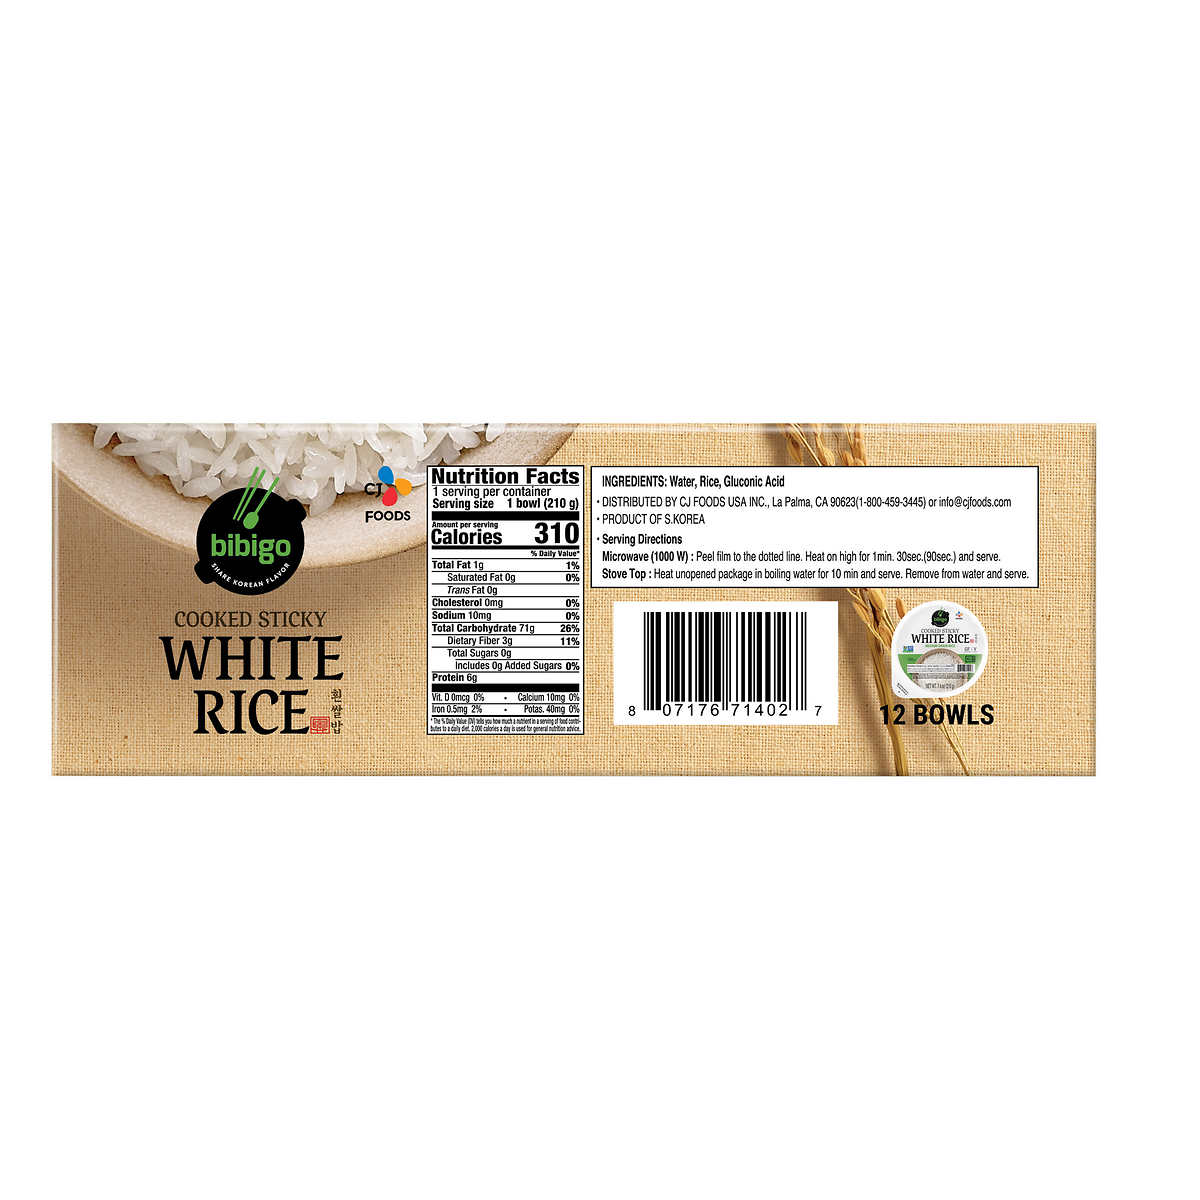 Bibigo Cooked Sticky White Rice Bowls, 7.4 Ounce (12 Count)